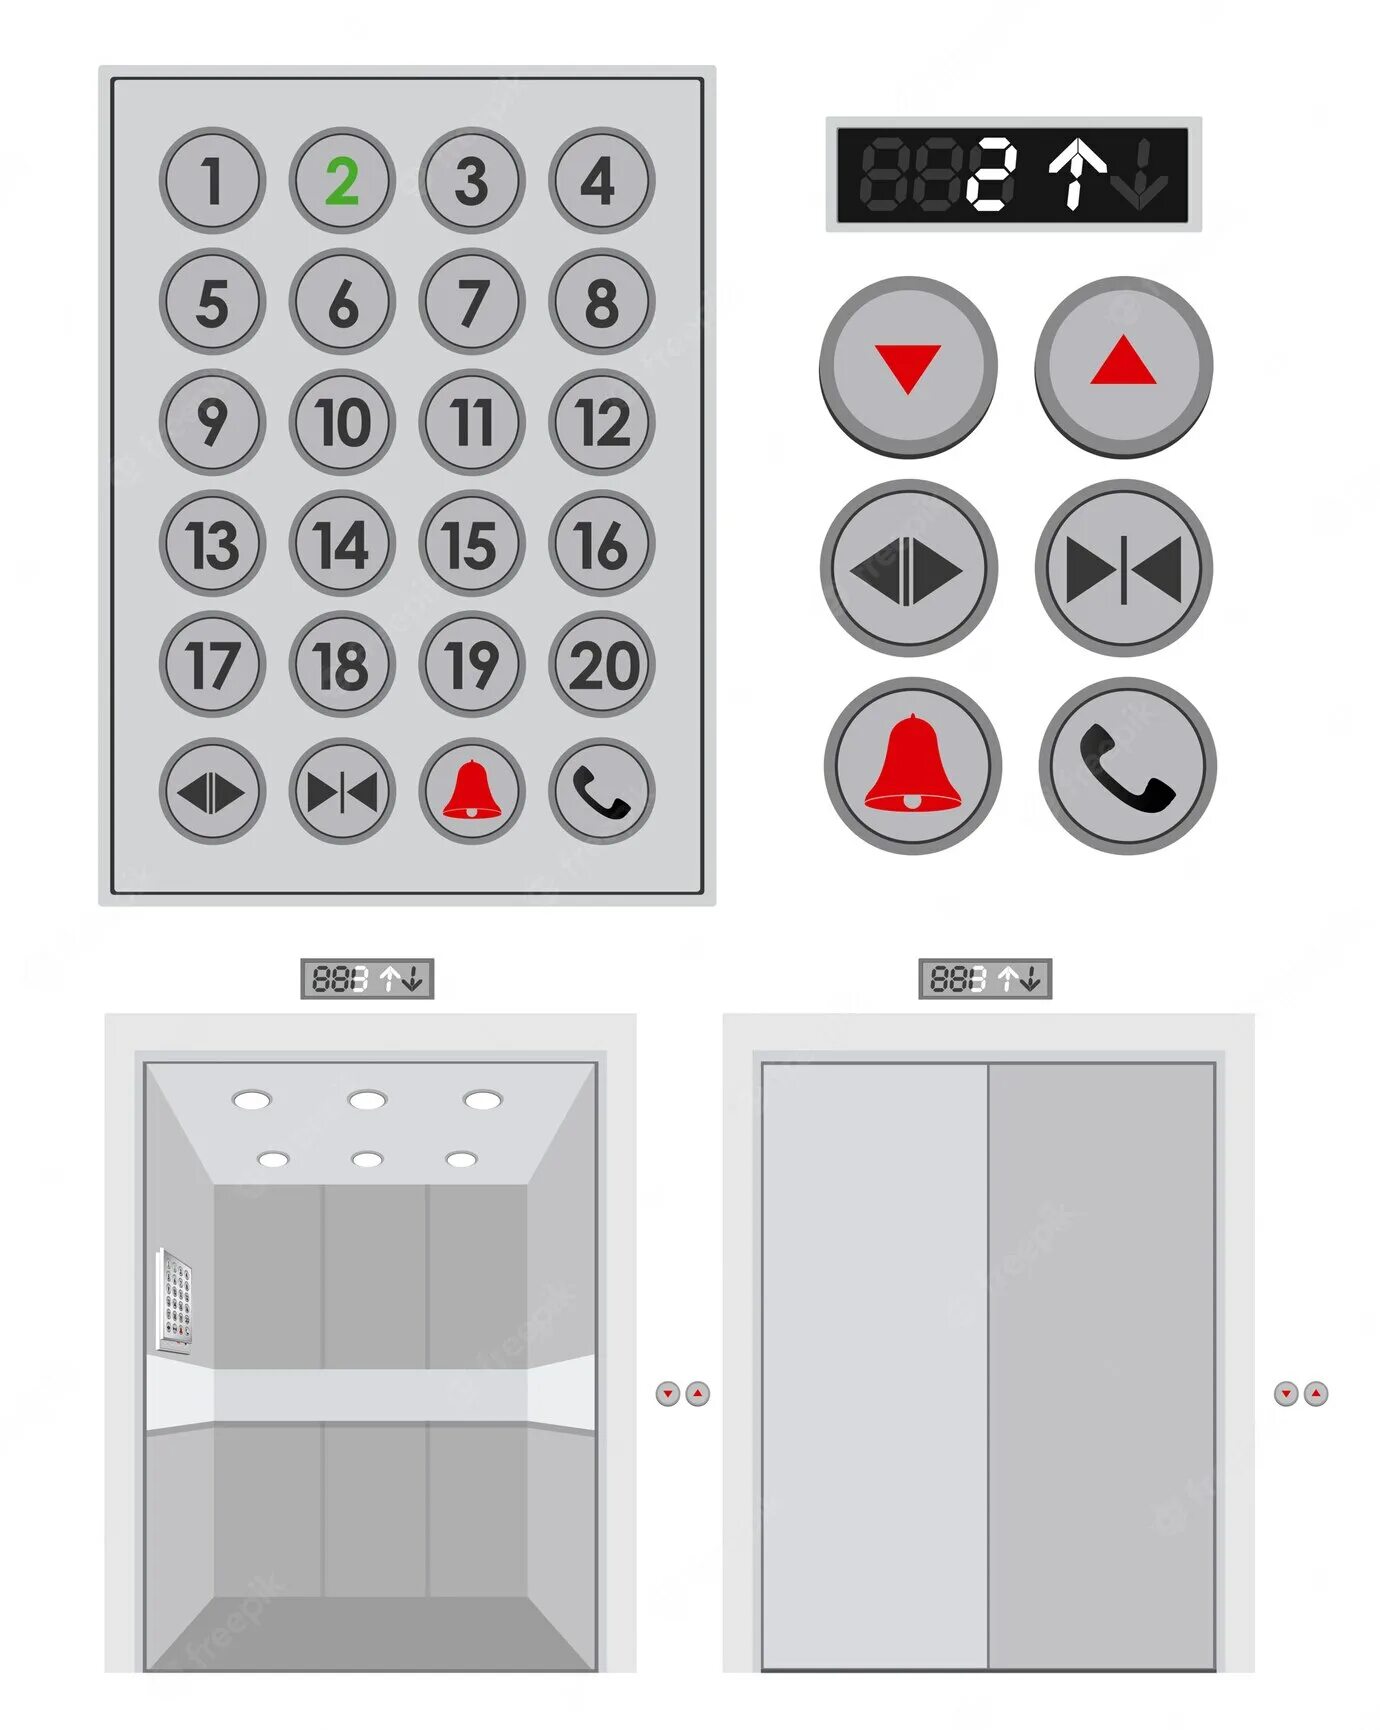 Elevator buttons #22